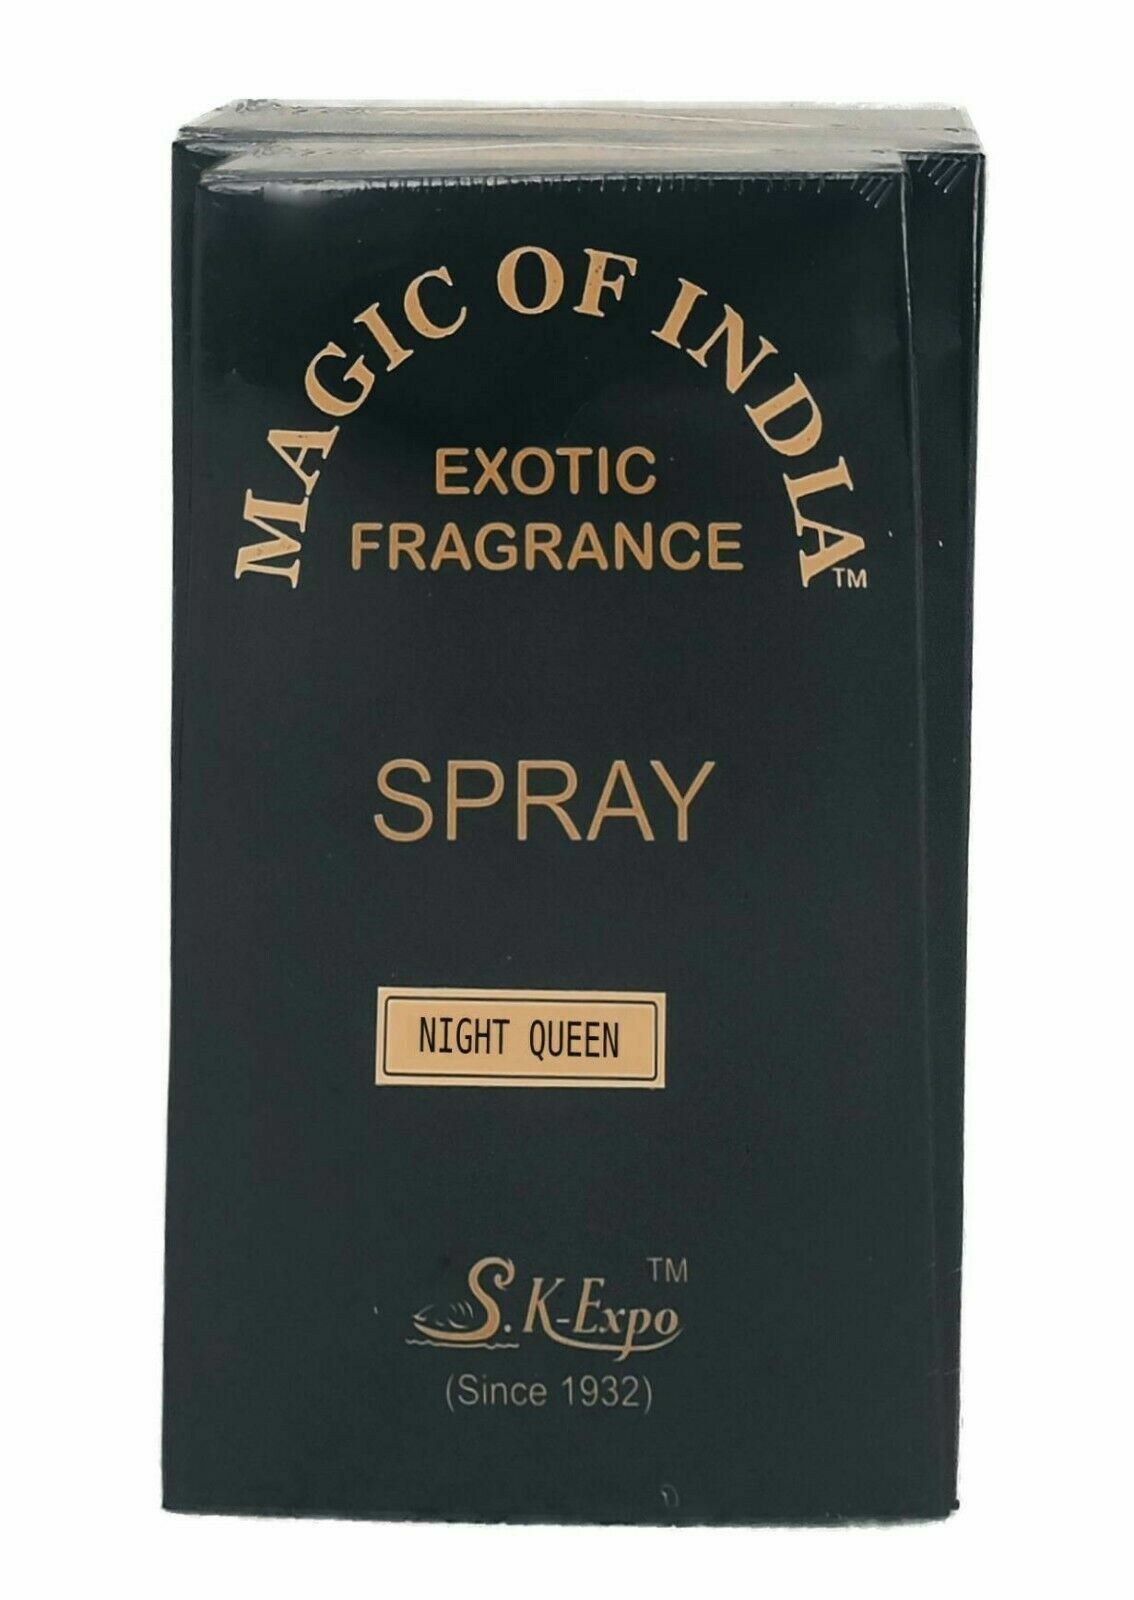 Magic of India Night Detroit Mall Queen Fragrance Spra Natural High quality new Exotic Perfume